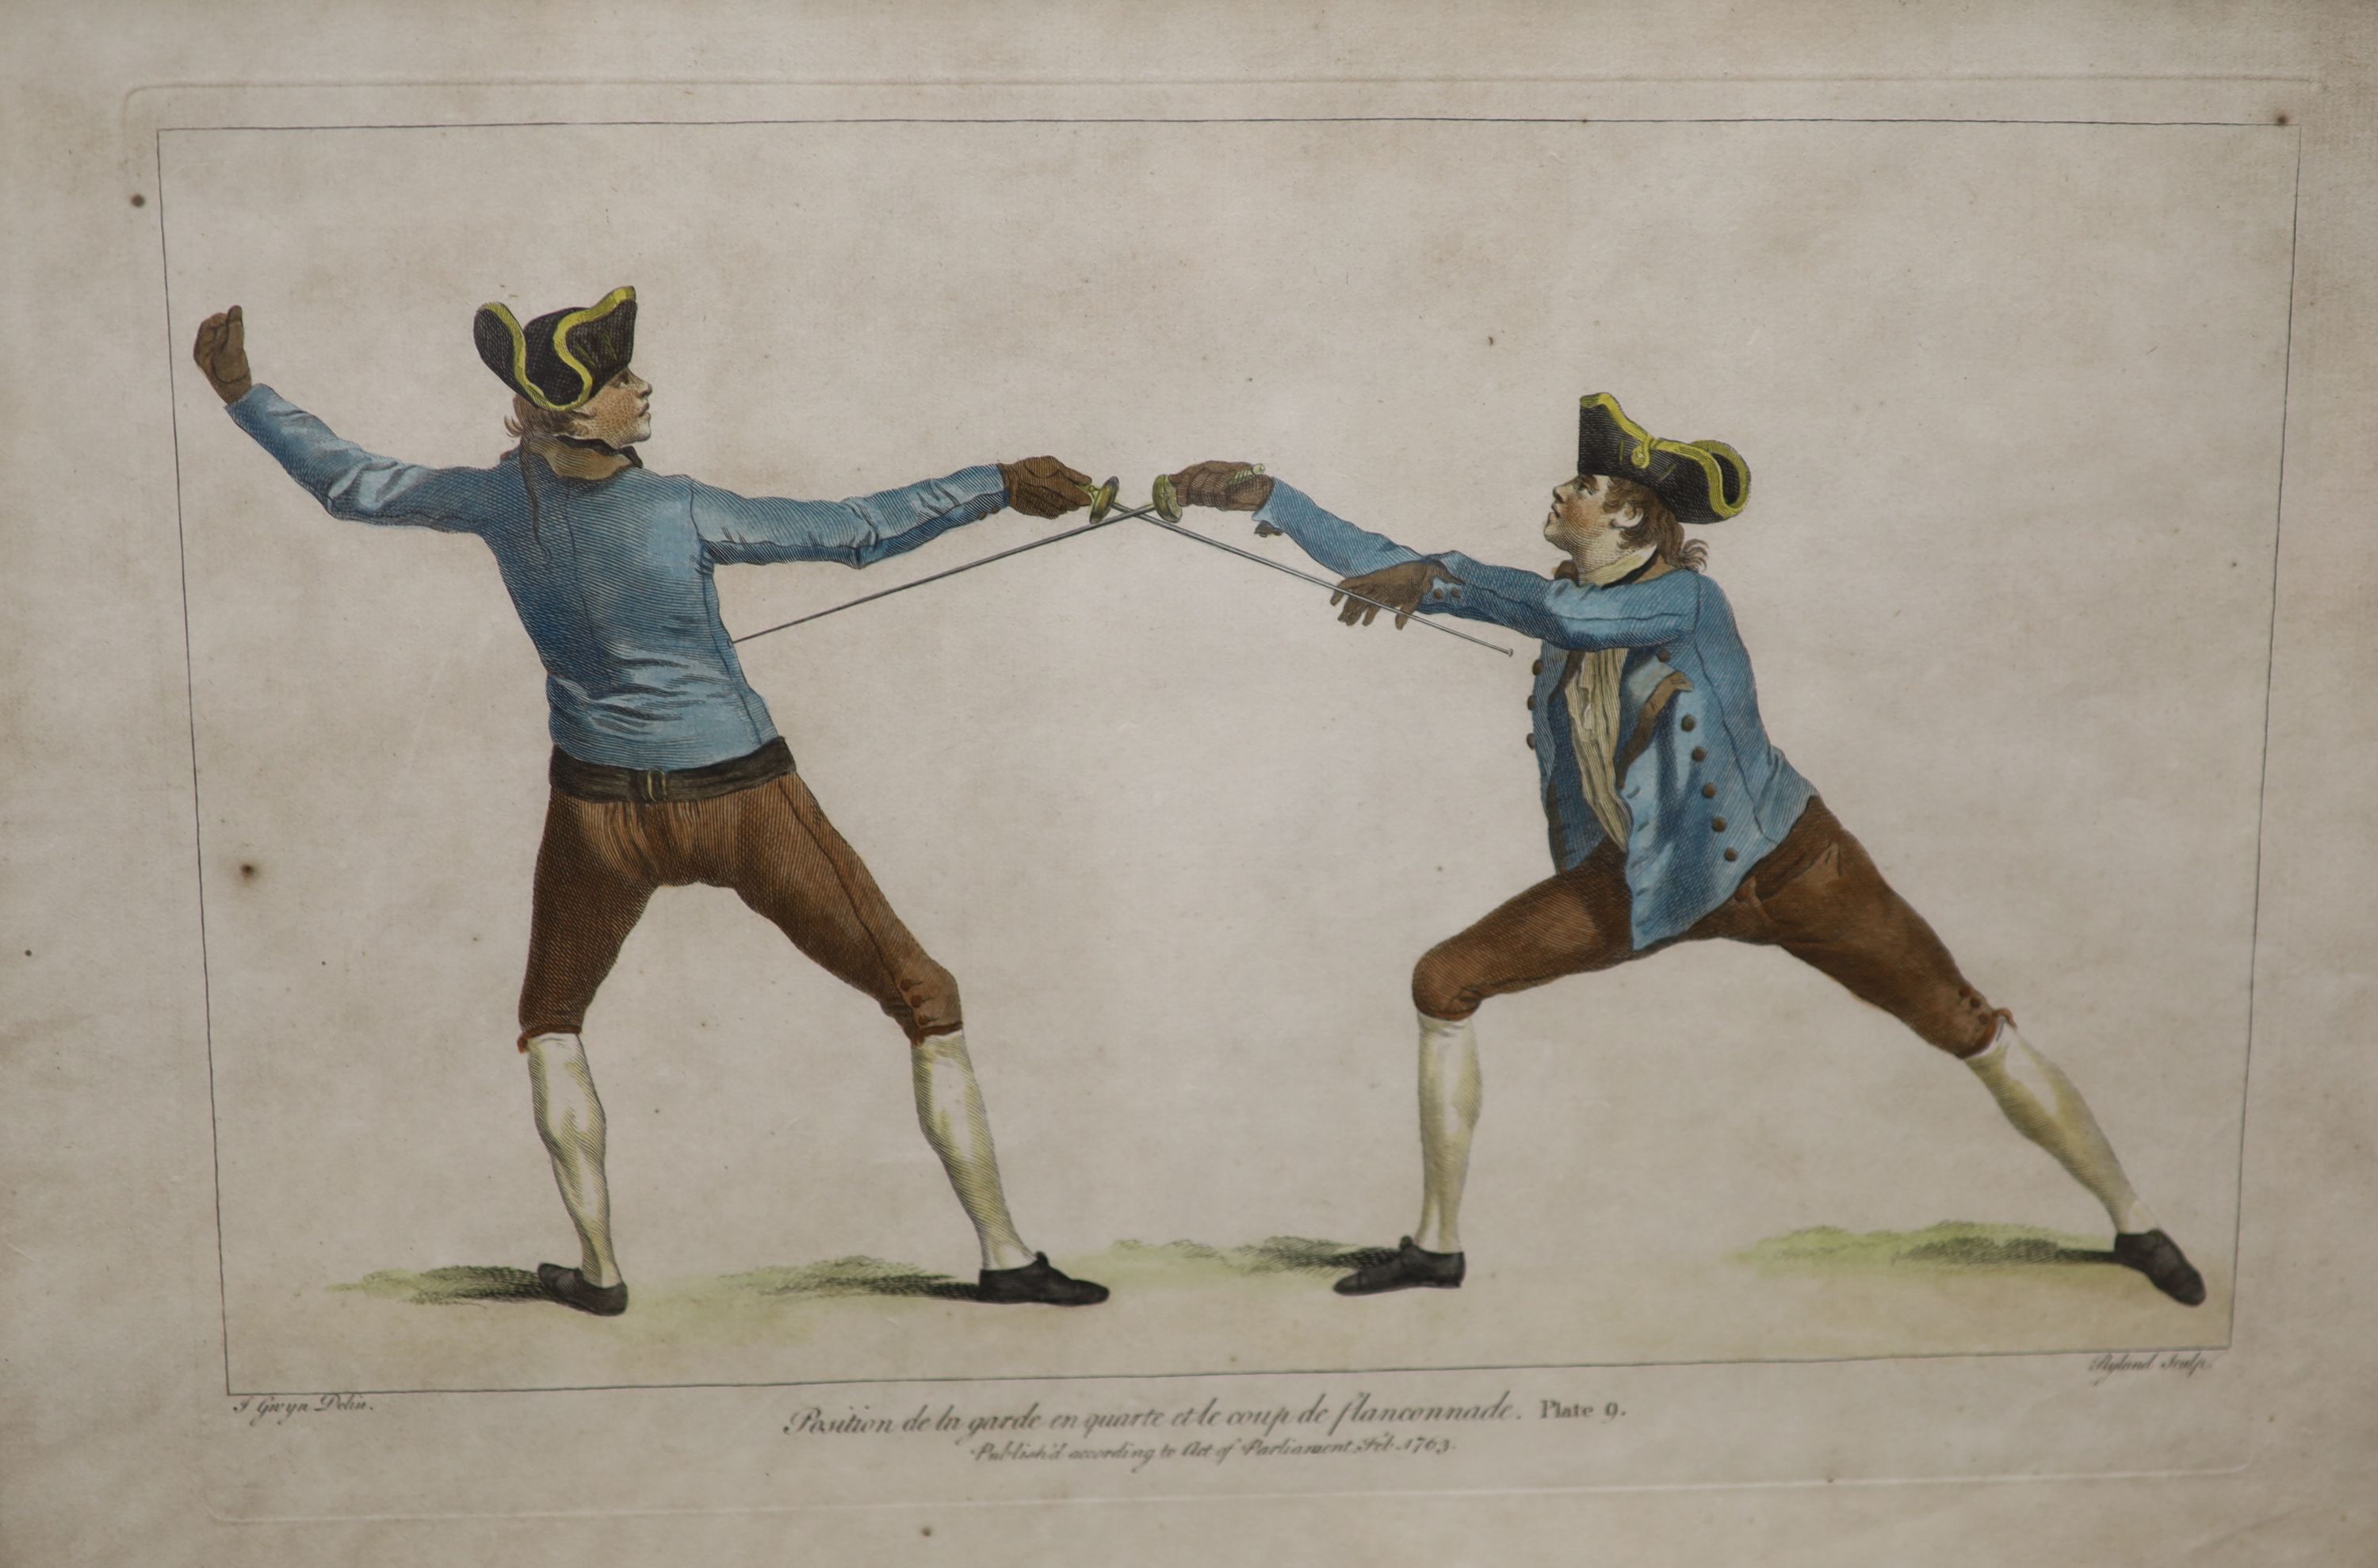 After J. Gruya, three coloured engravings, Fencing Positions, Plates 5, 9 and 40, 42 x 46cm, maple framed